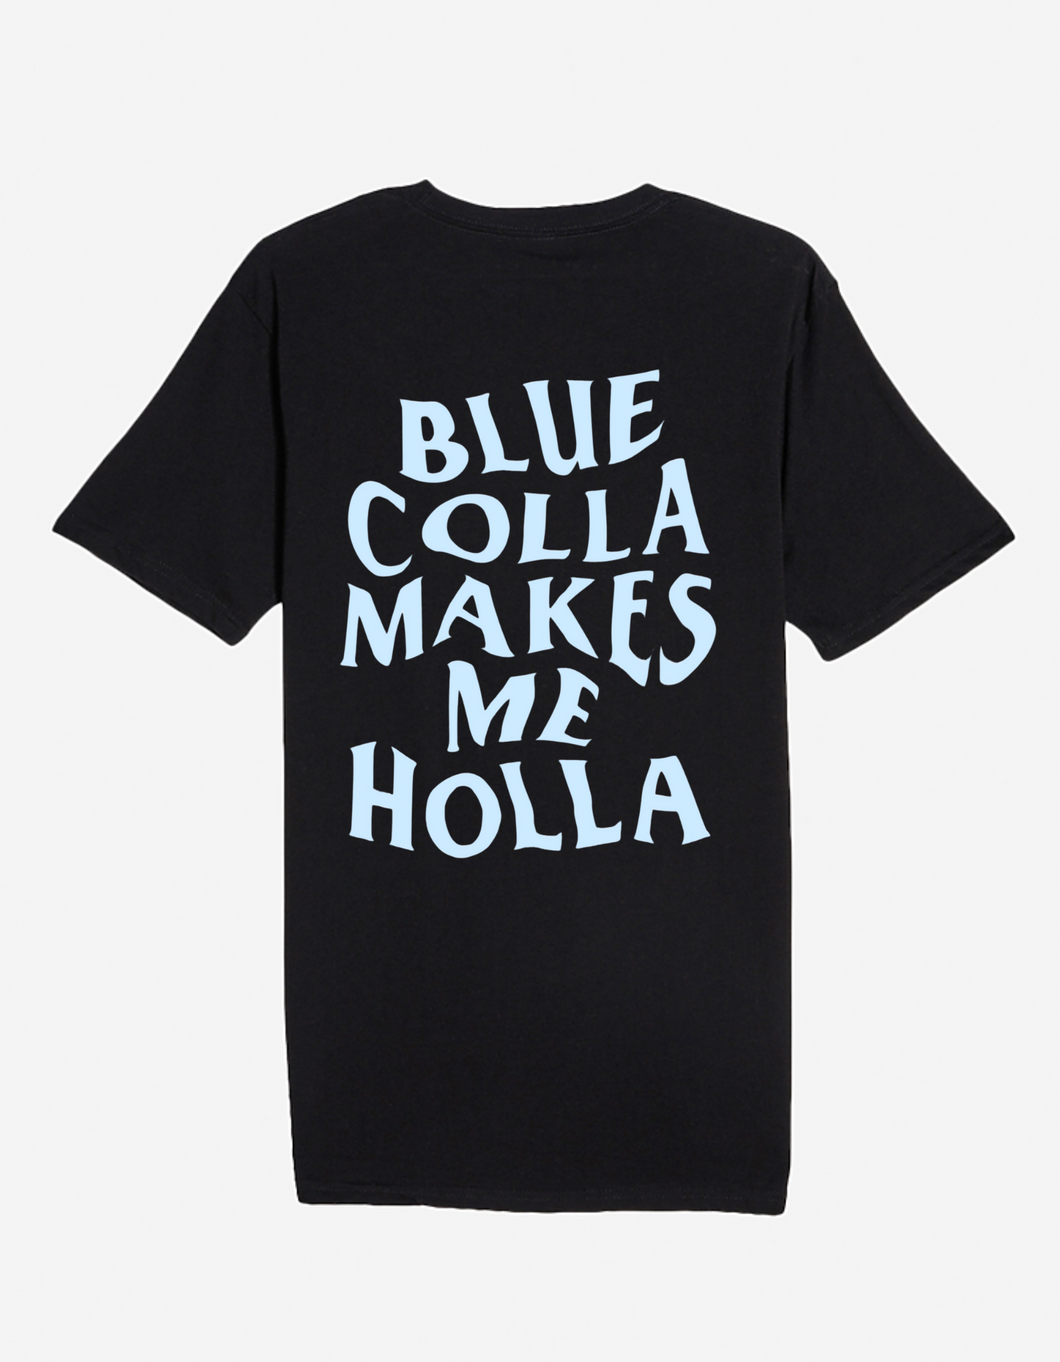 Blue Colla Makes me Holla - Graphic Tee (Black)